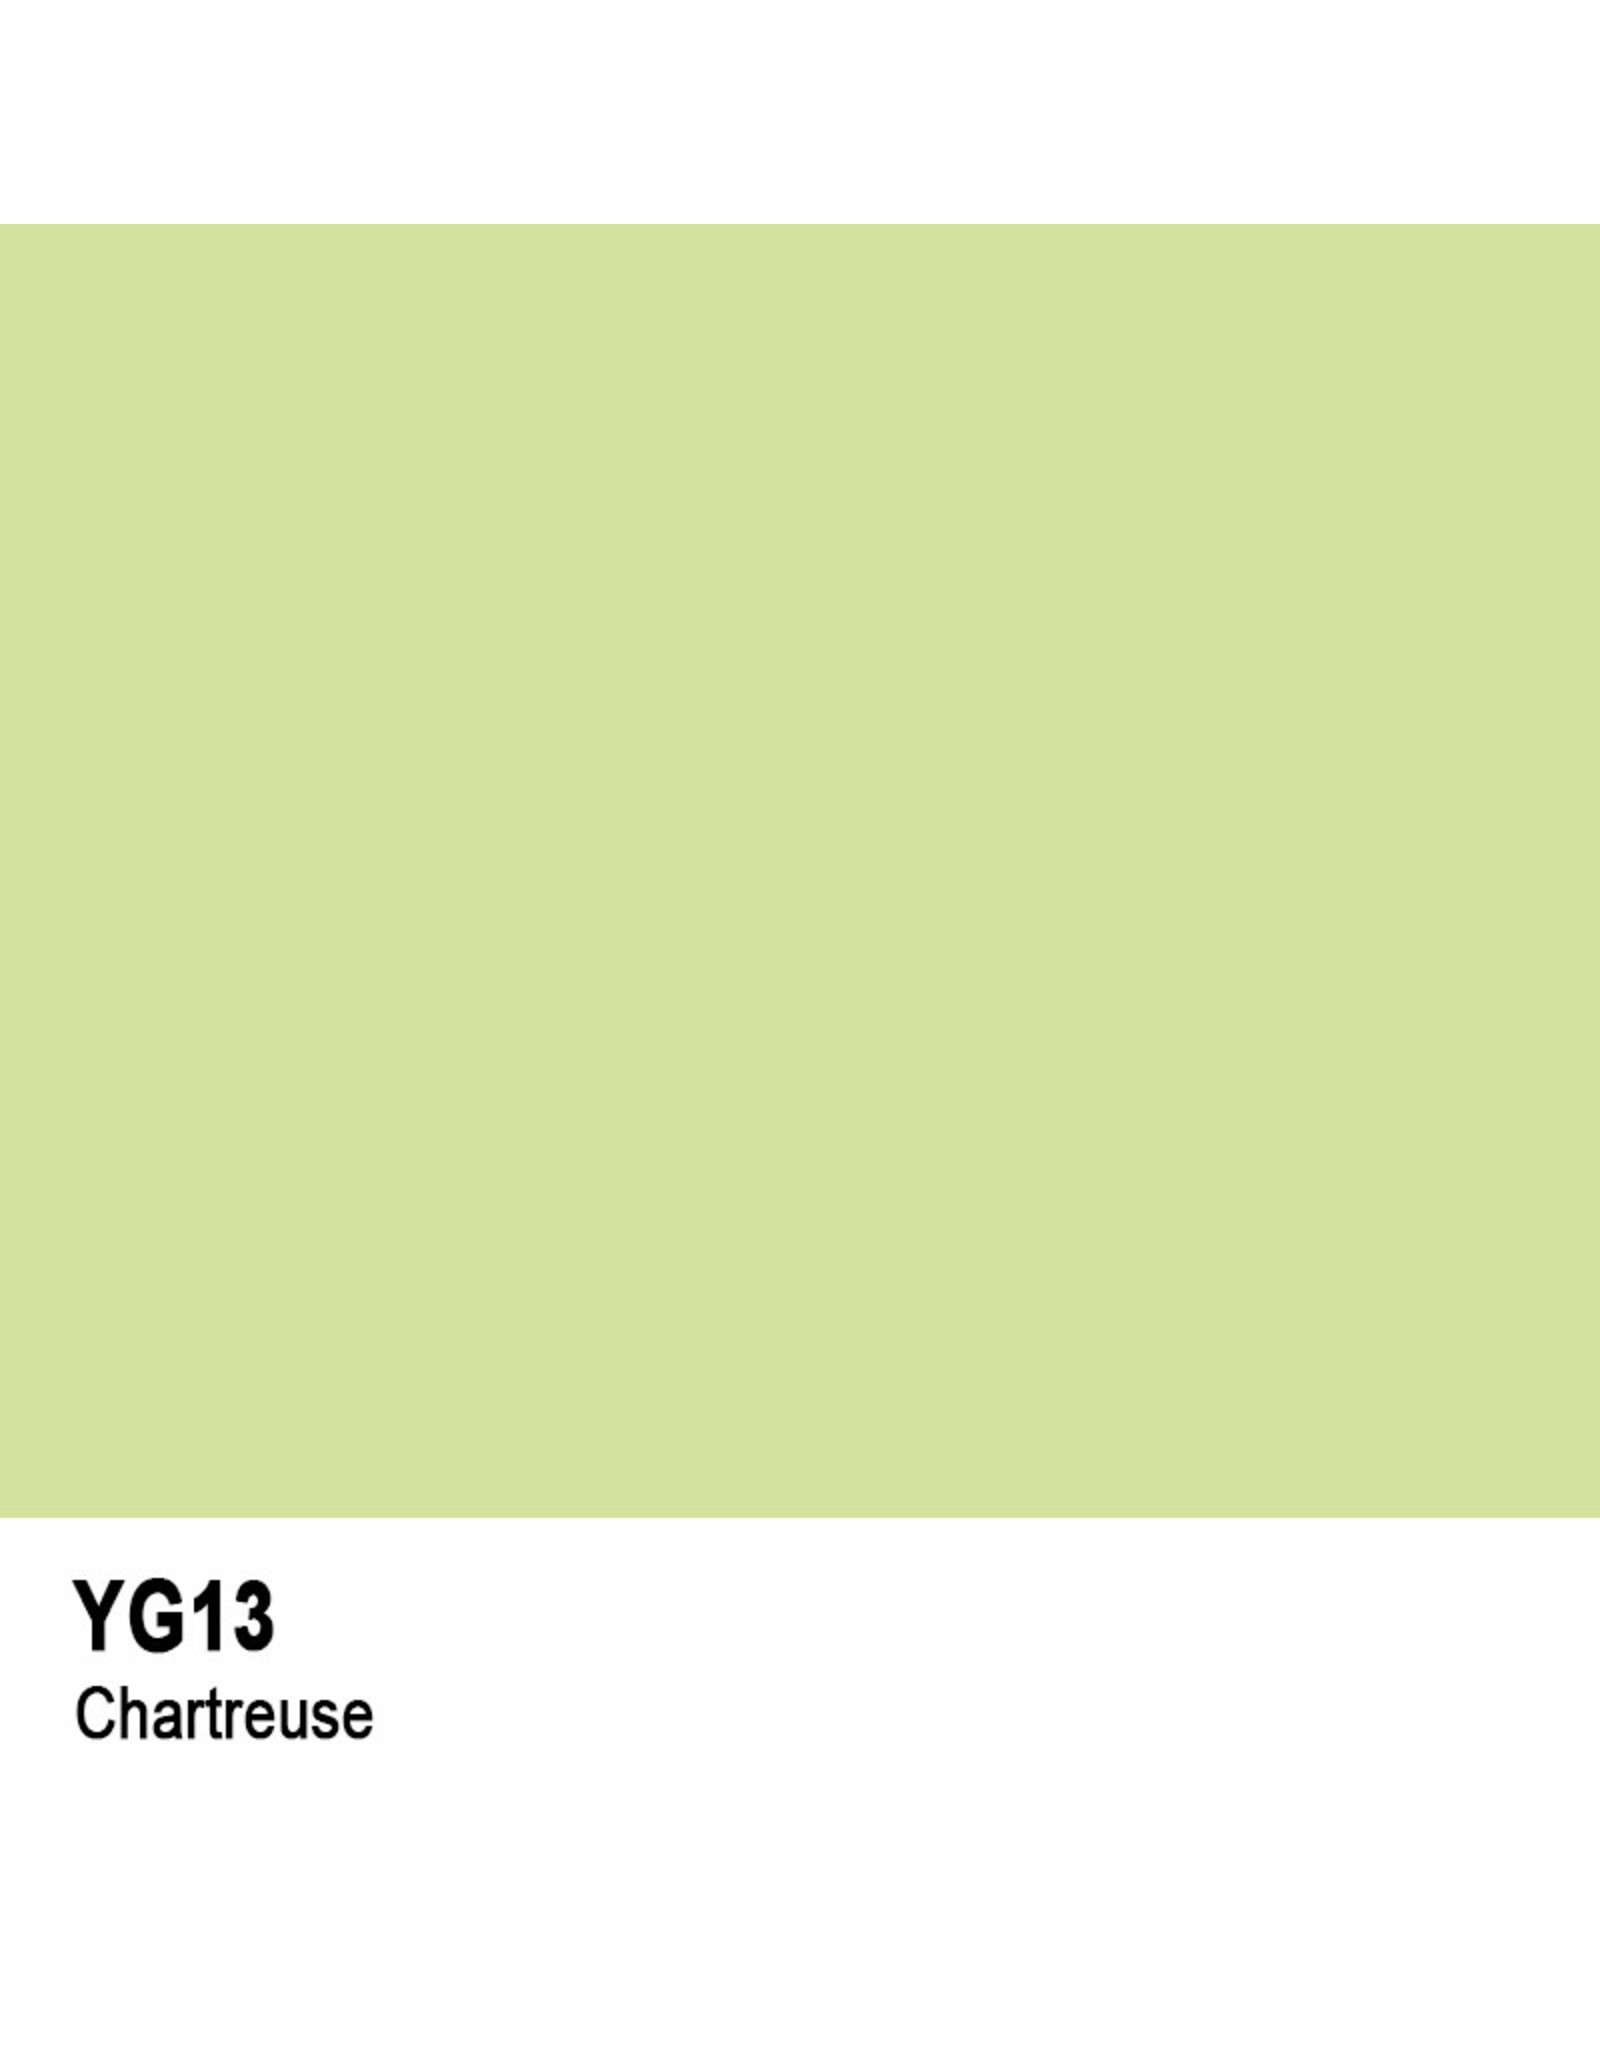 COPIC COPIC YG13 CHARTREUSE SKETCH MARKER